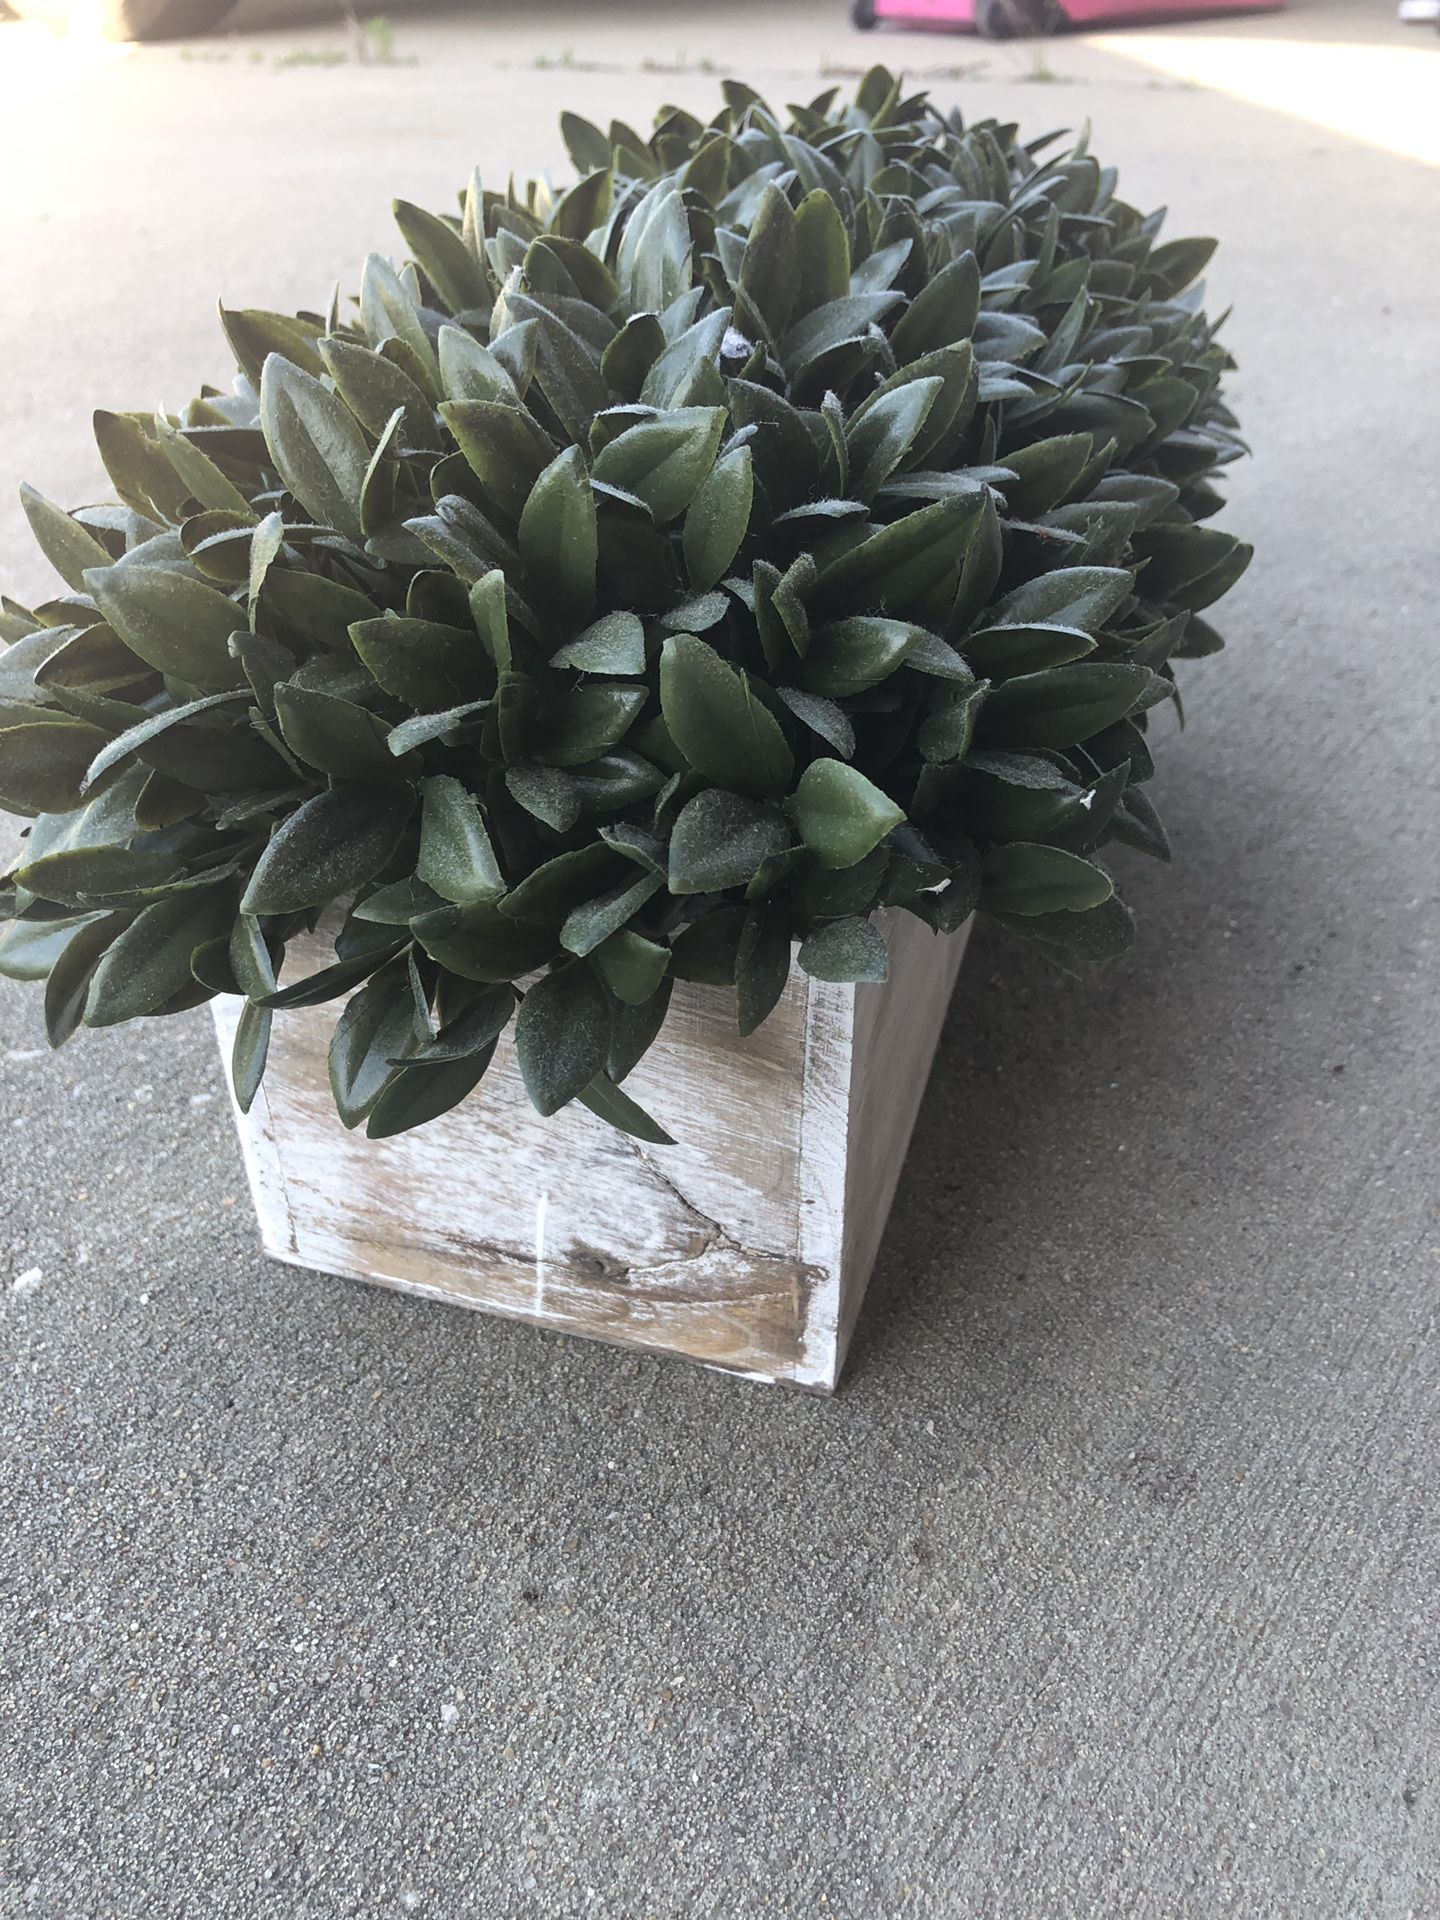 Rustic planter with fake plant